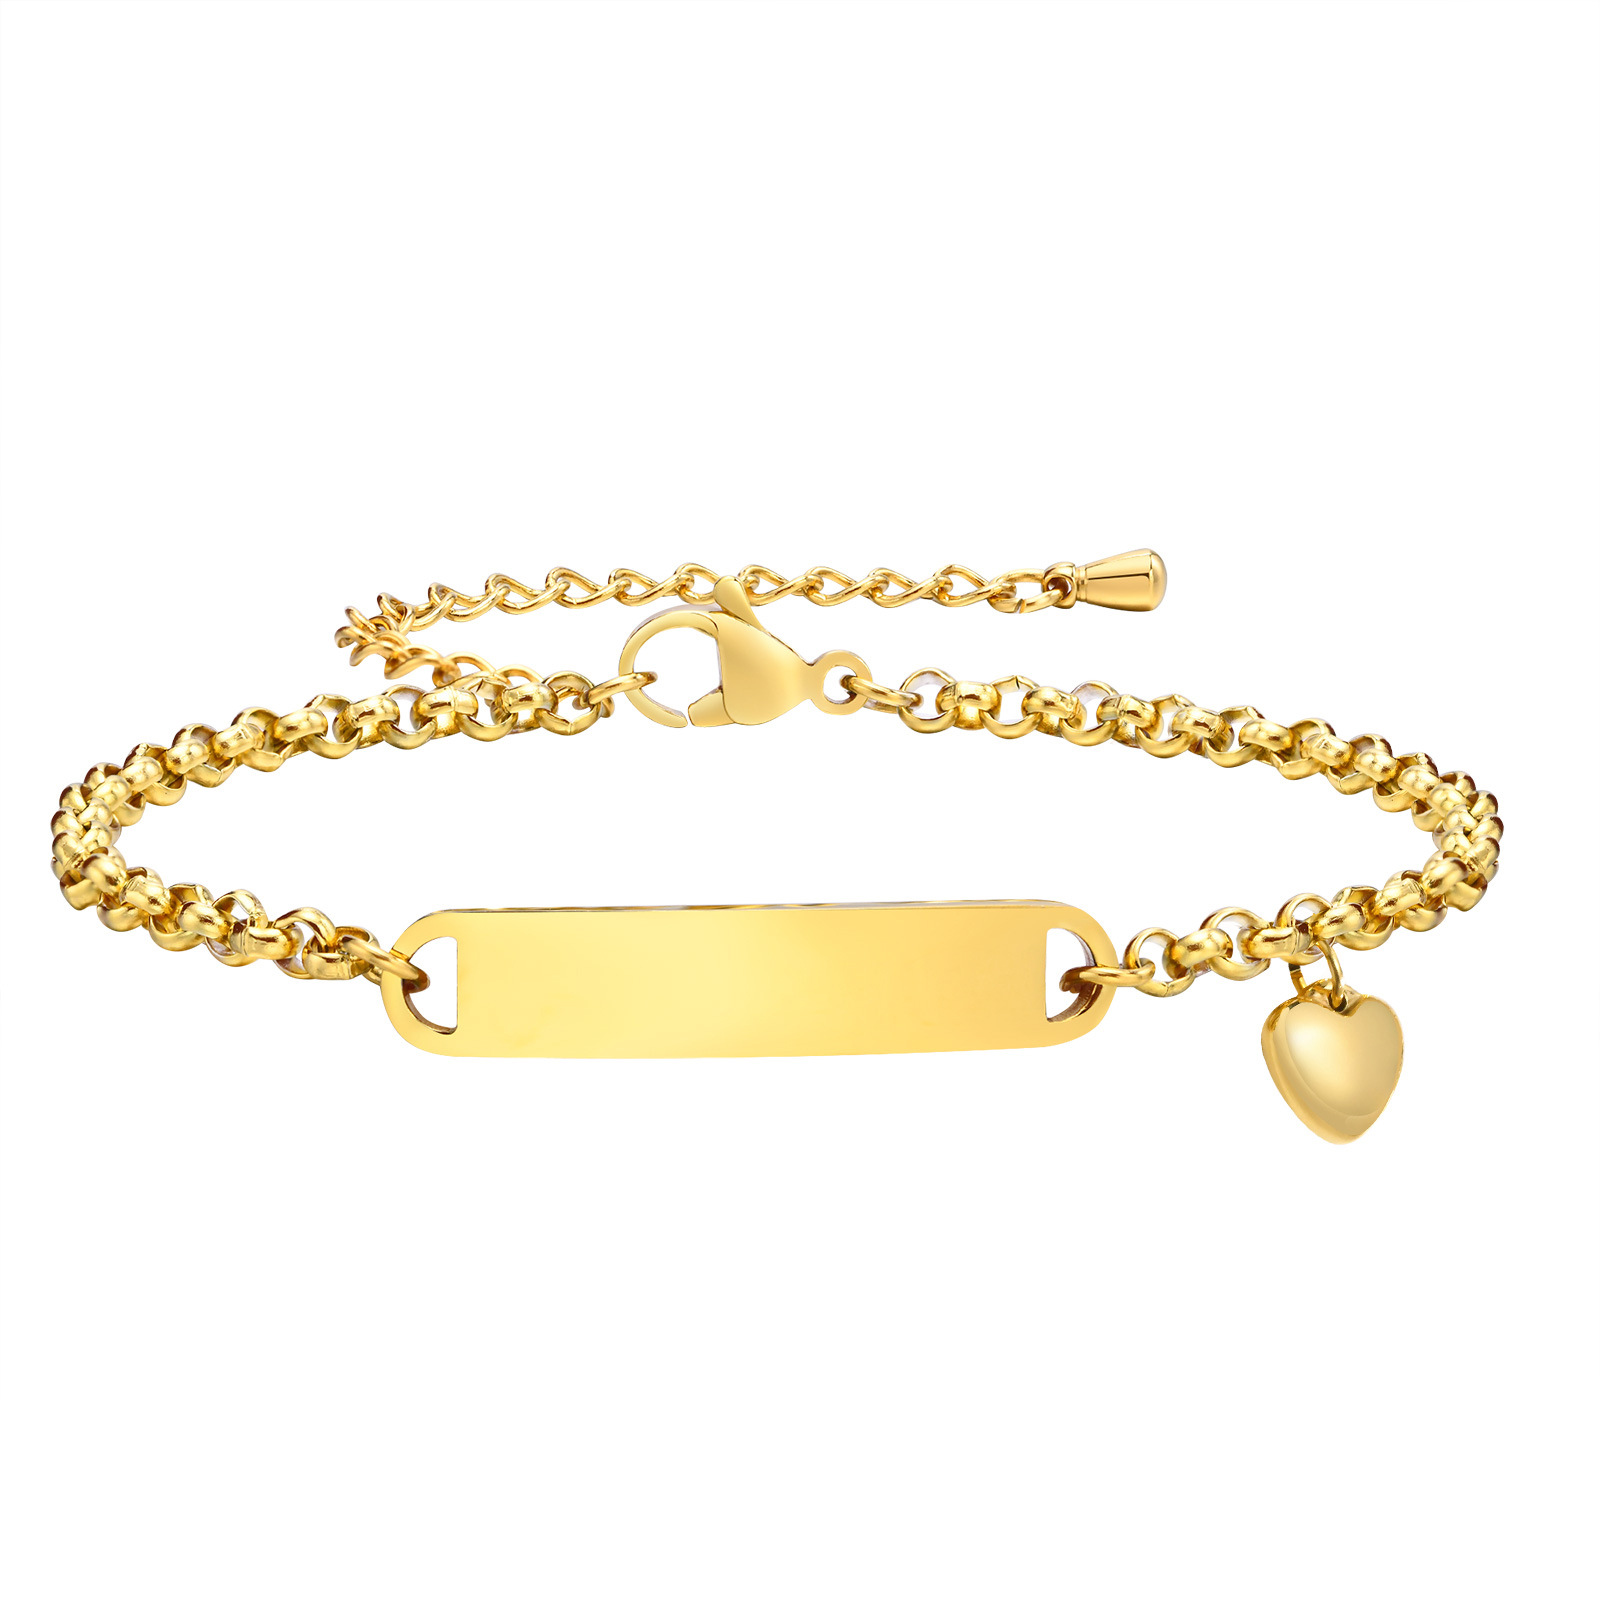 Gold chain width 3MM; Total chain length 16.5-5MM